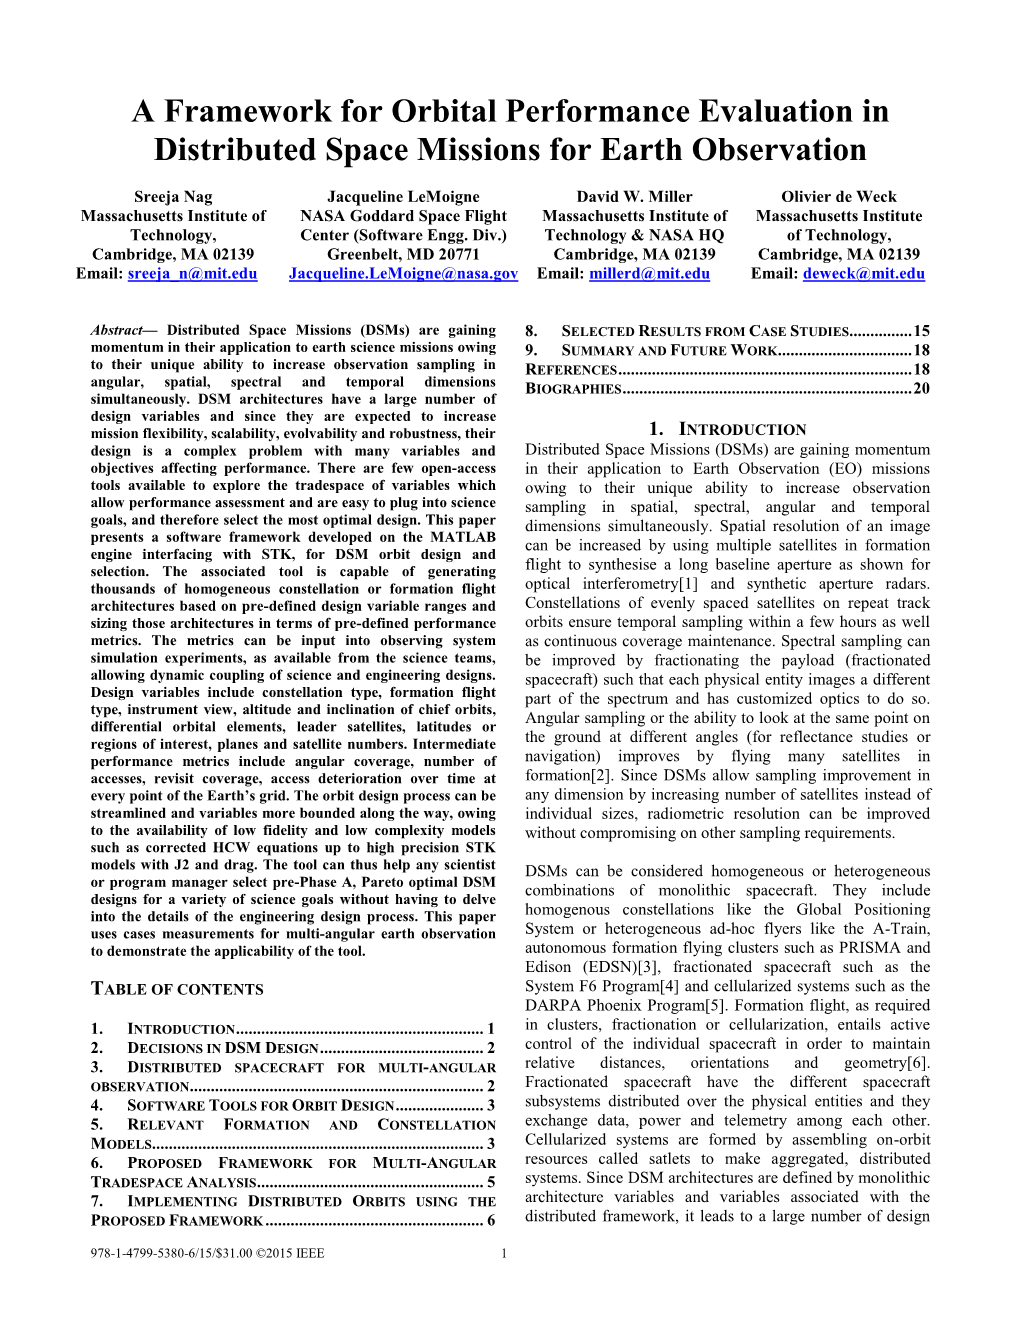 A Framework for Orbital Performance Evaluation in Distributed Space Missions for Earth Observation